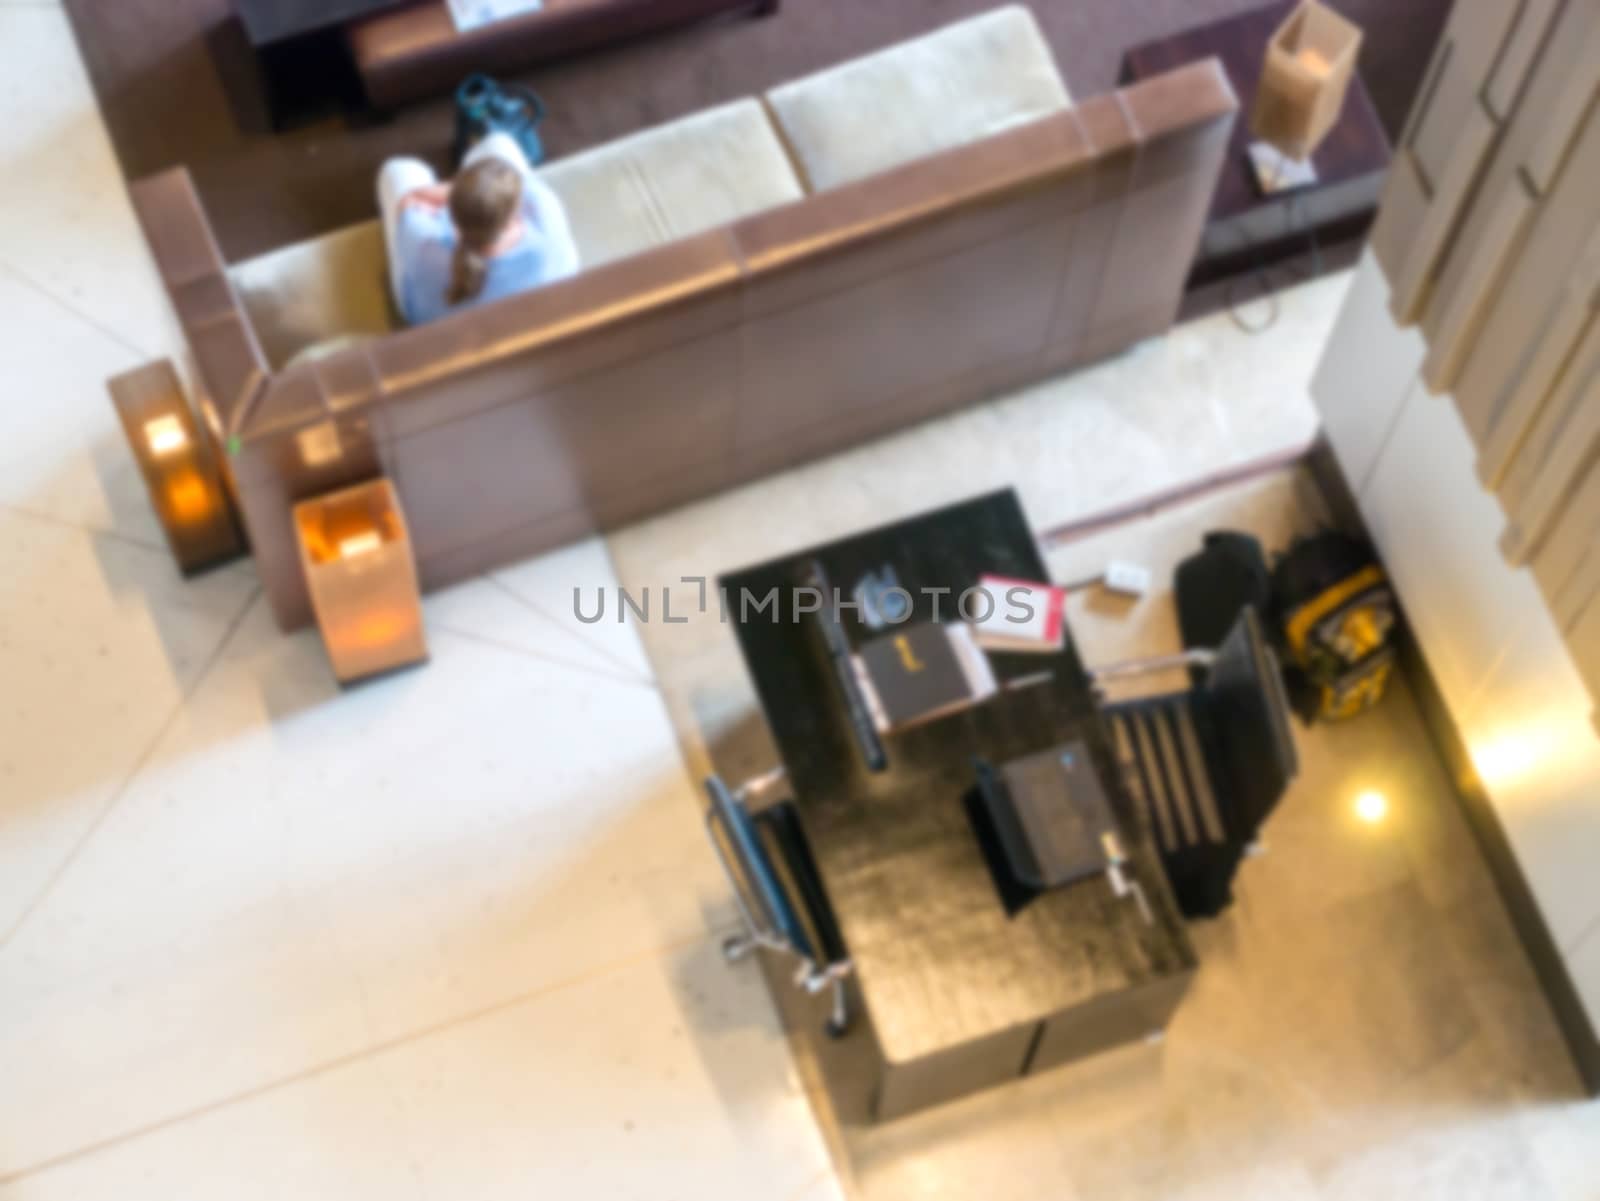 Blurred,The hotel receptionist is currently serving customers.